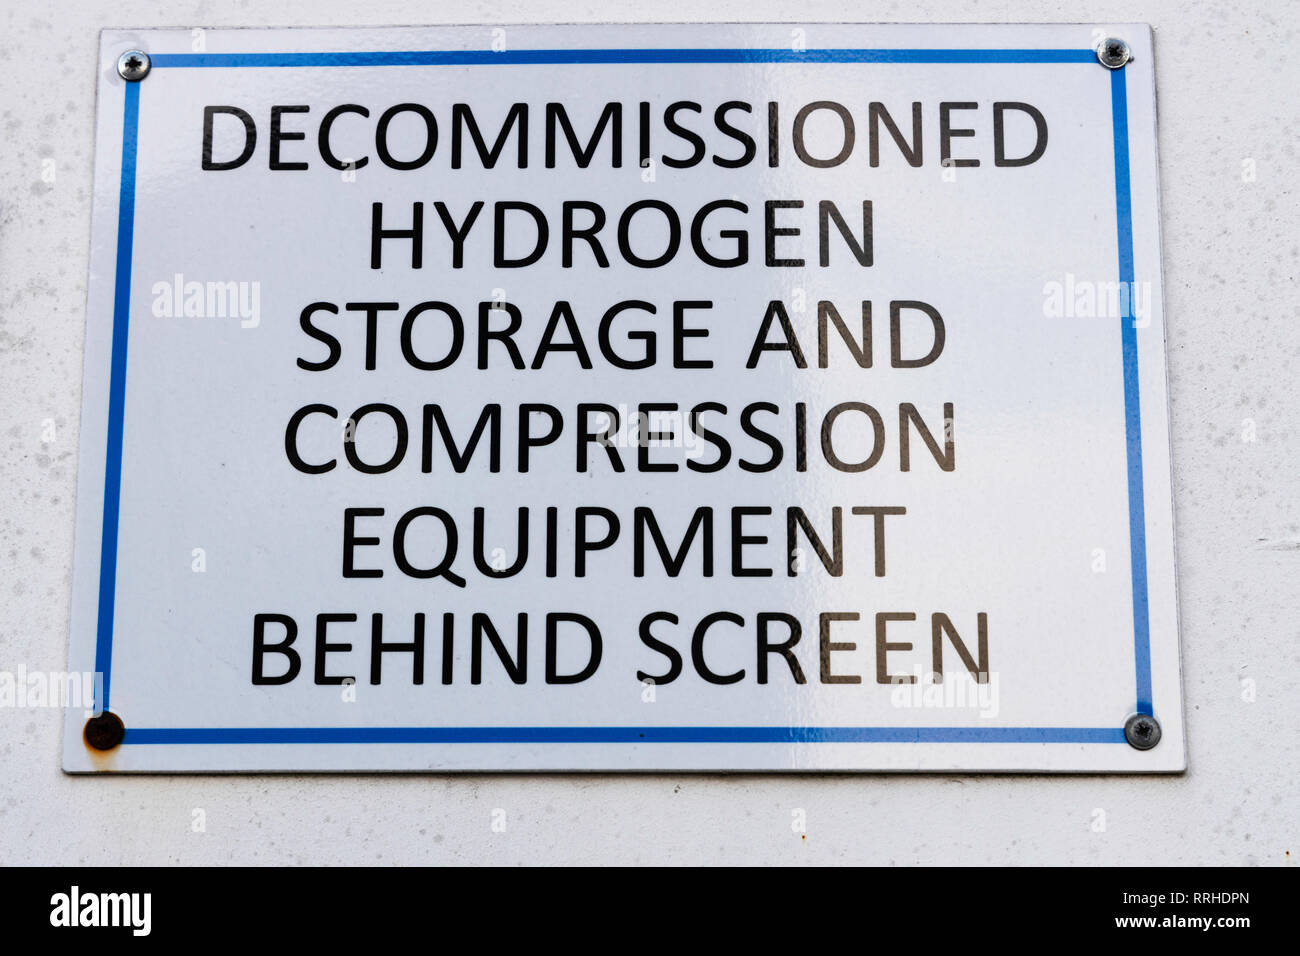 Decommissioned hydrogen storage and compression equipment sign Stock Photo